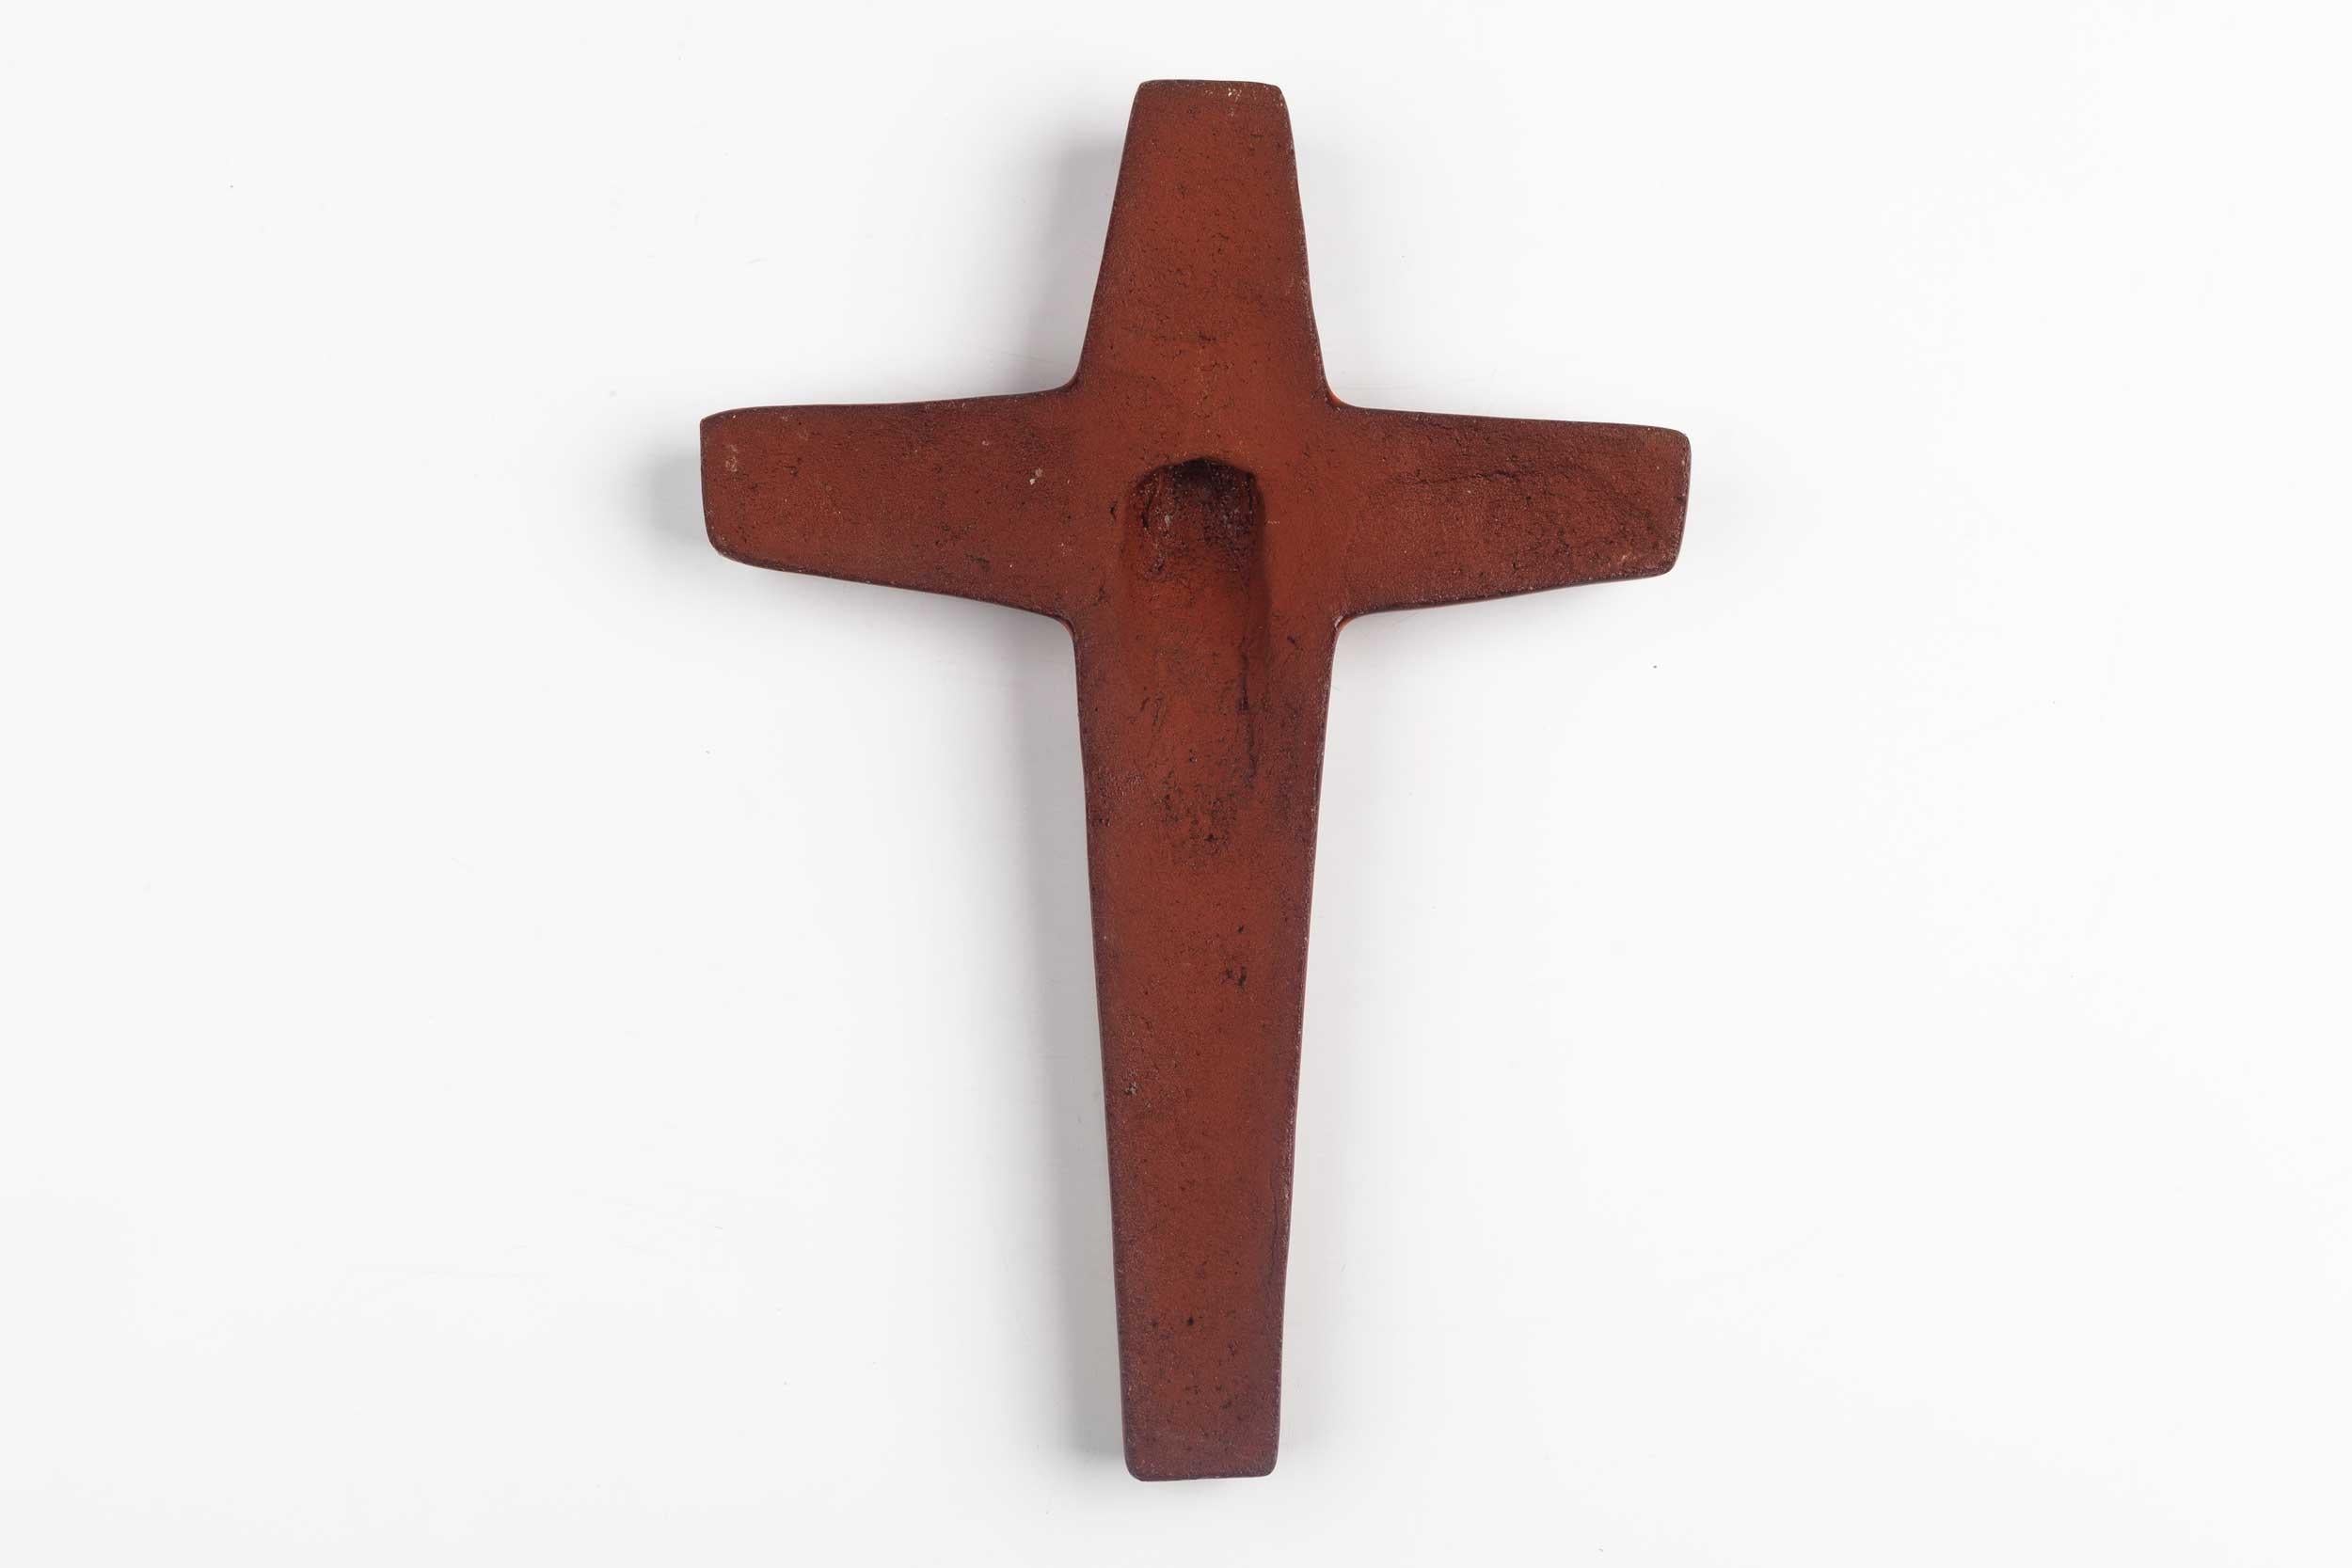 Hand-Crafted Midcentury Religious European Ceramic Cross, 1970s For Sale